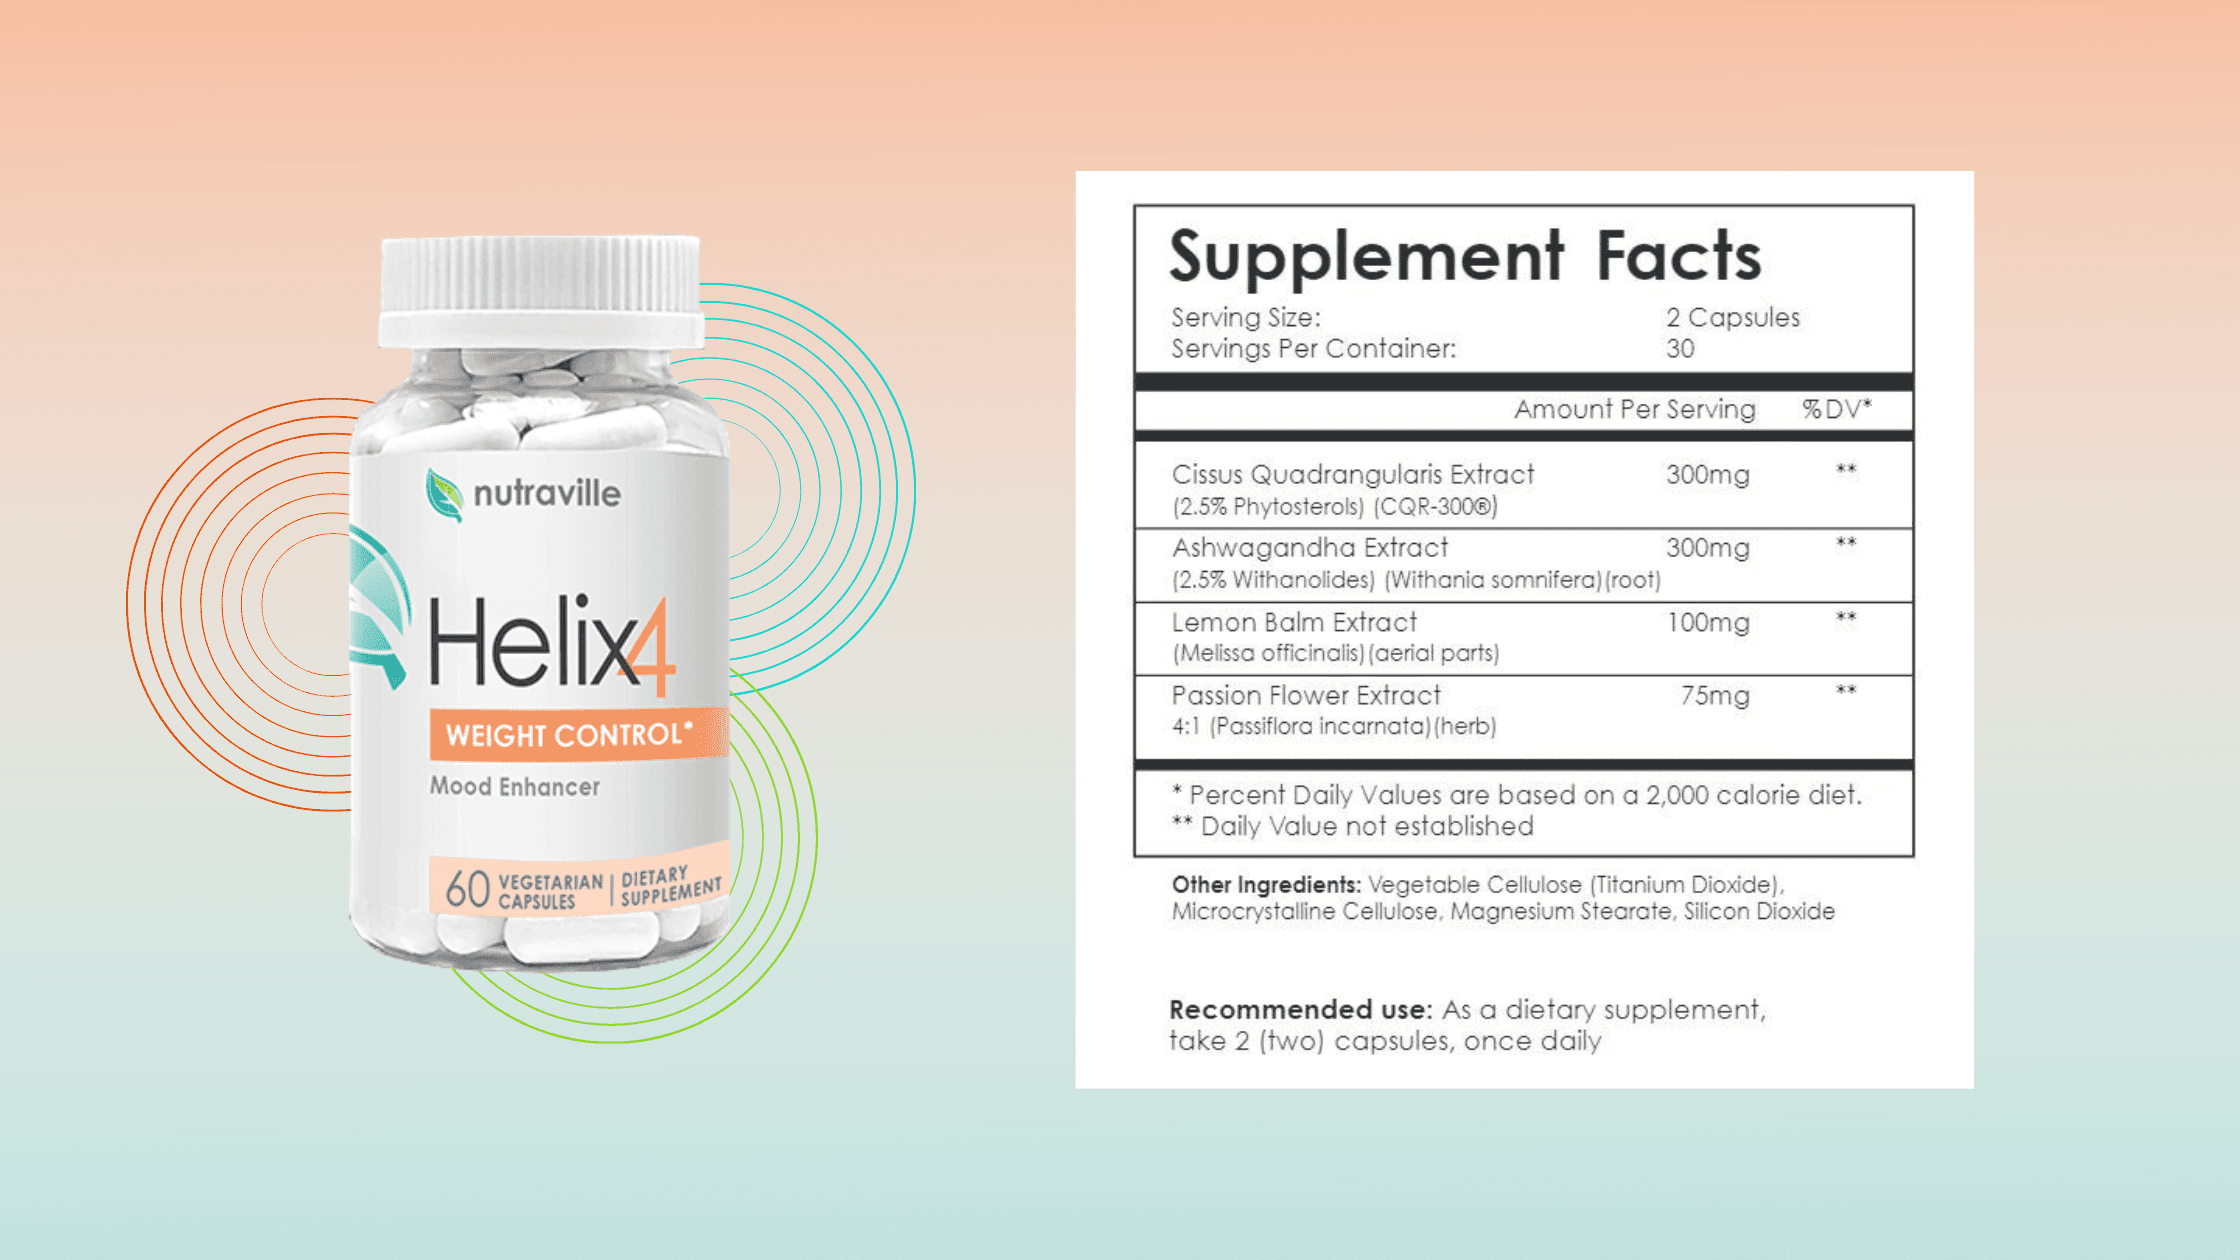 Nutraville Helix 4 Supplement Facts